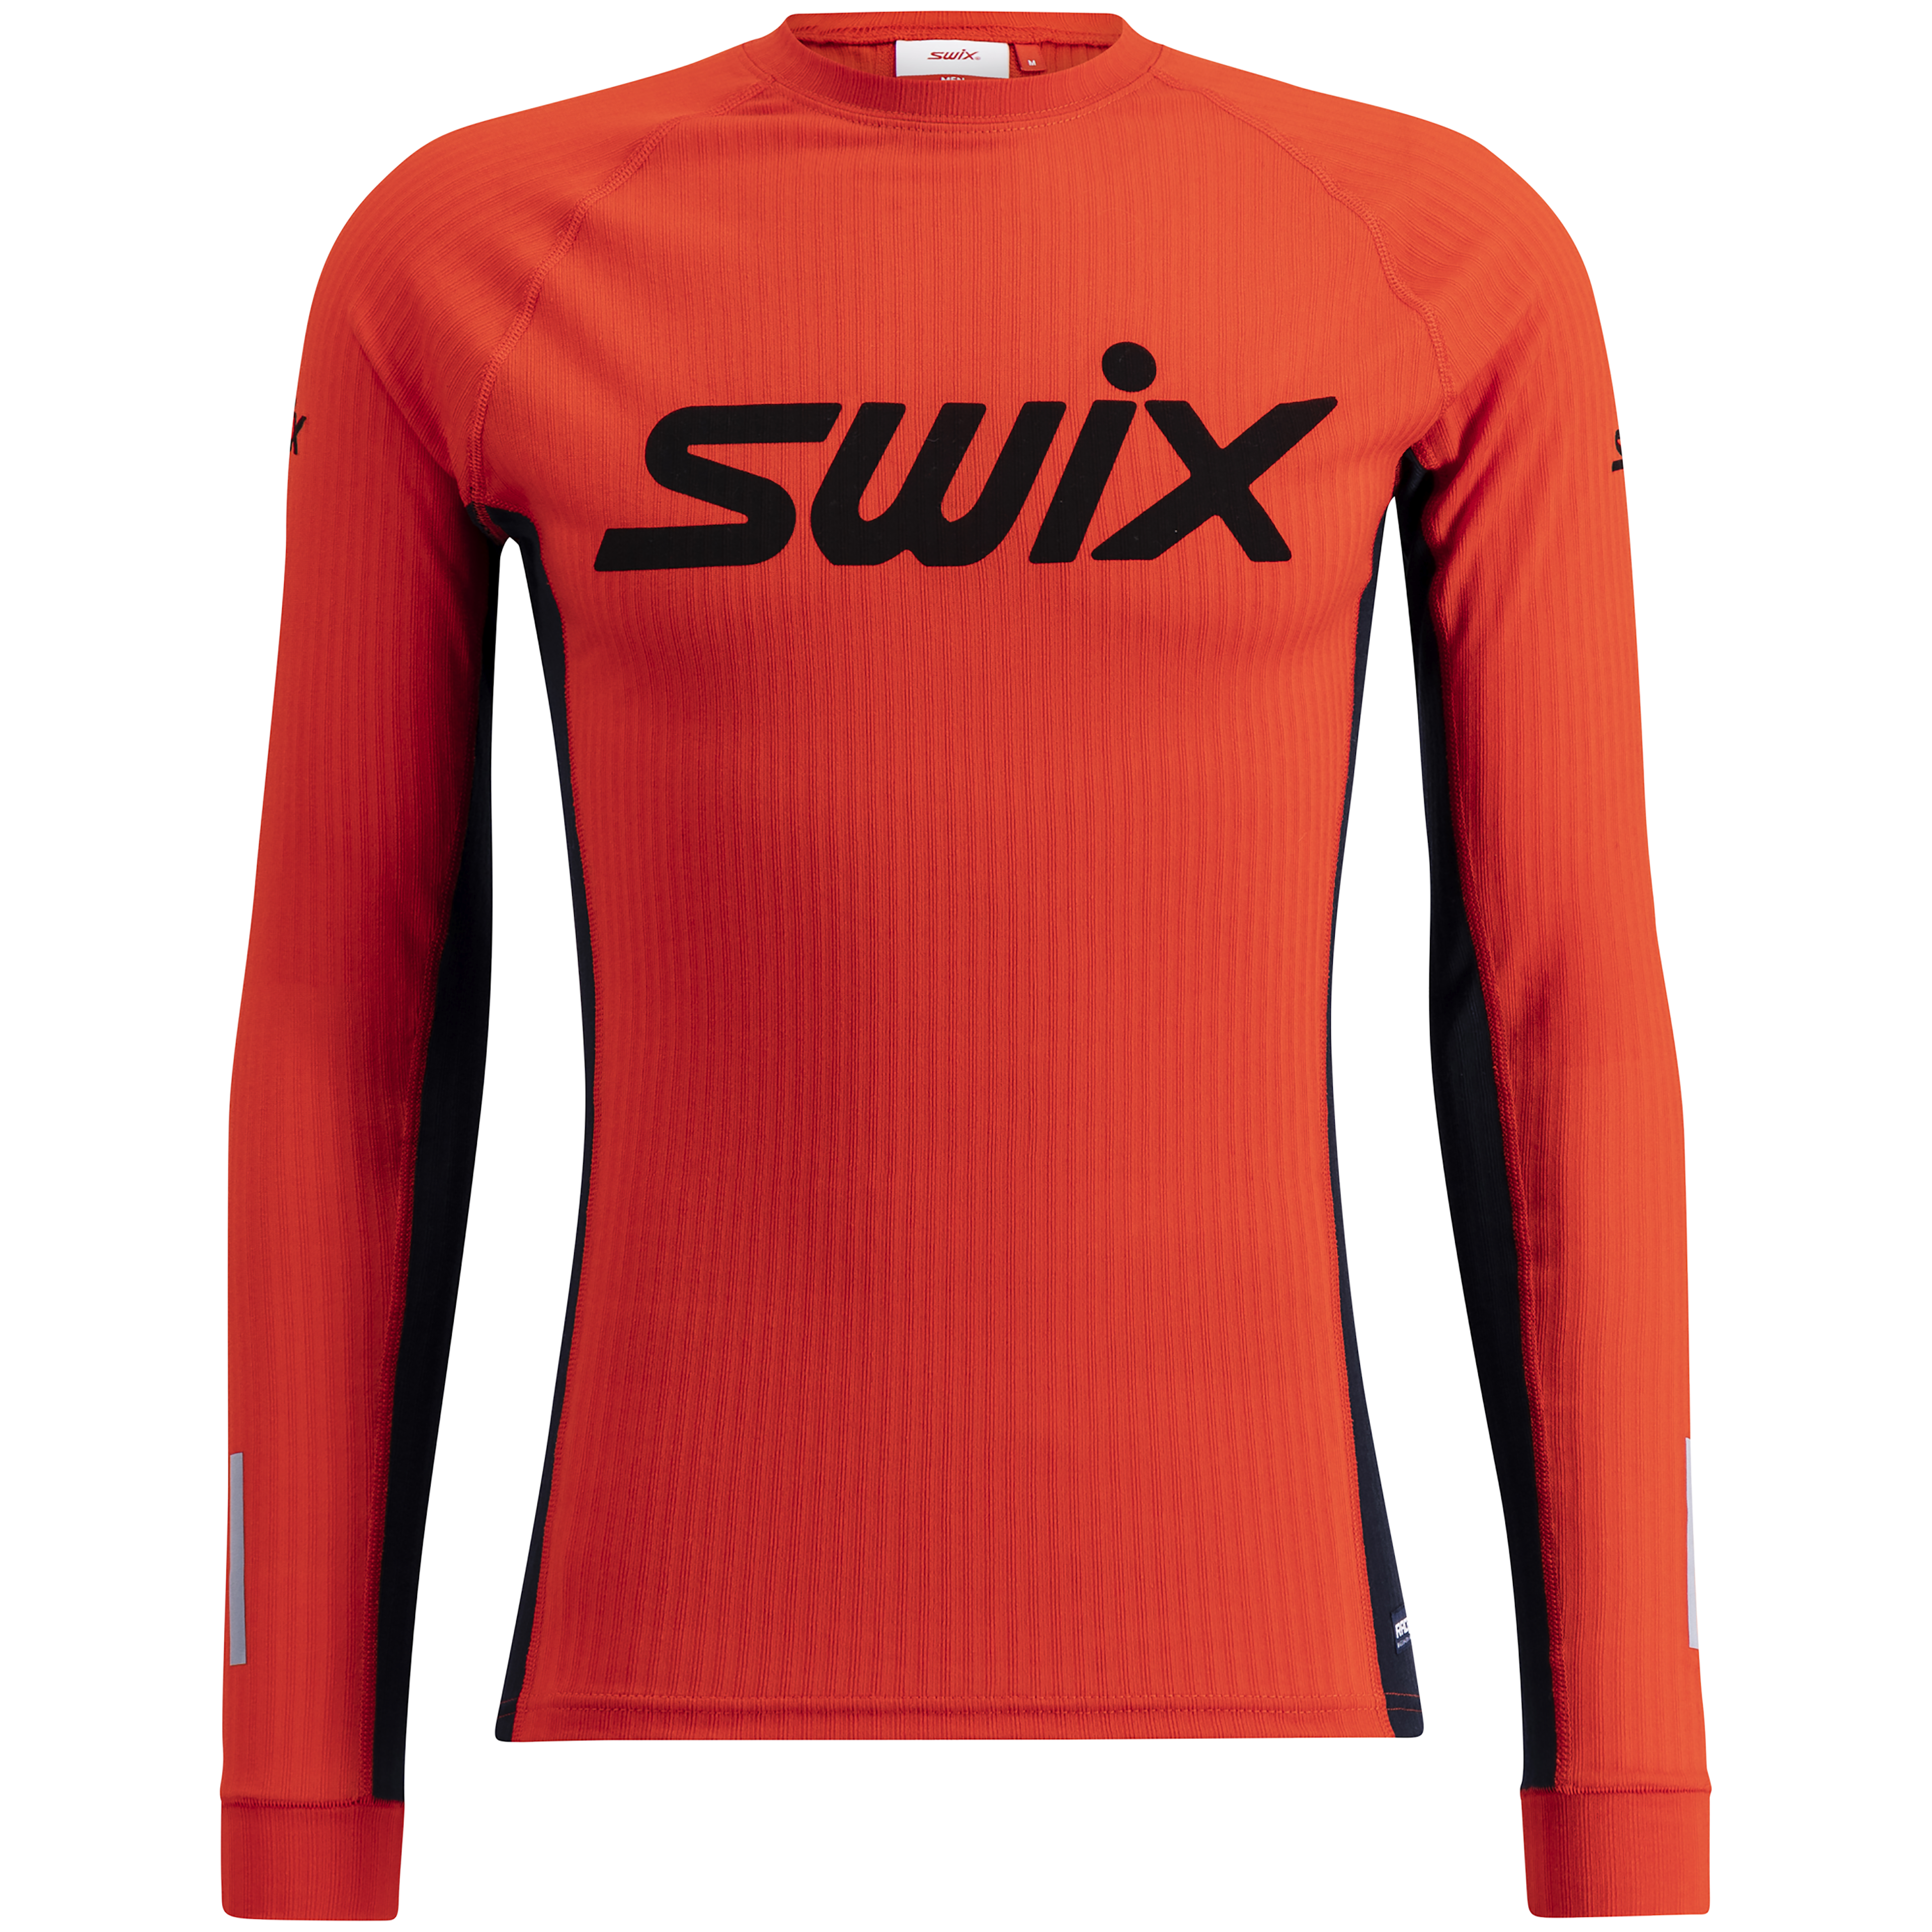 Swix Premium sport products for cross country skiing, running and 